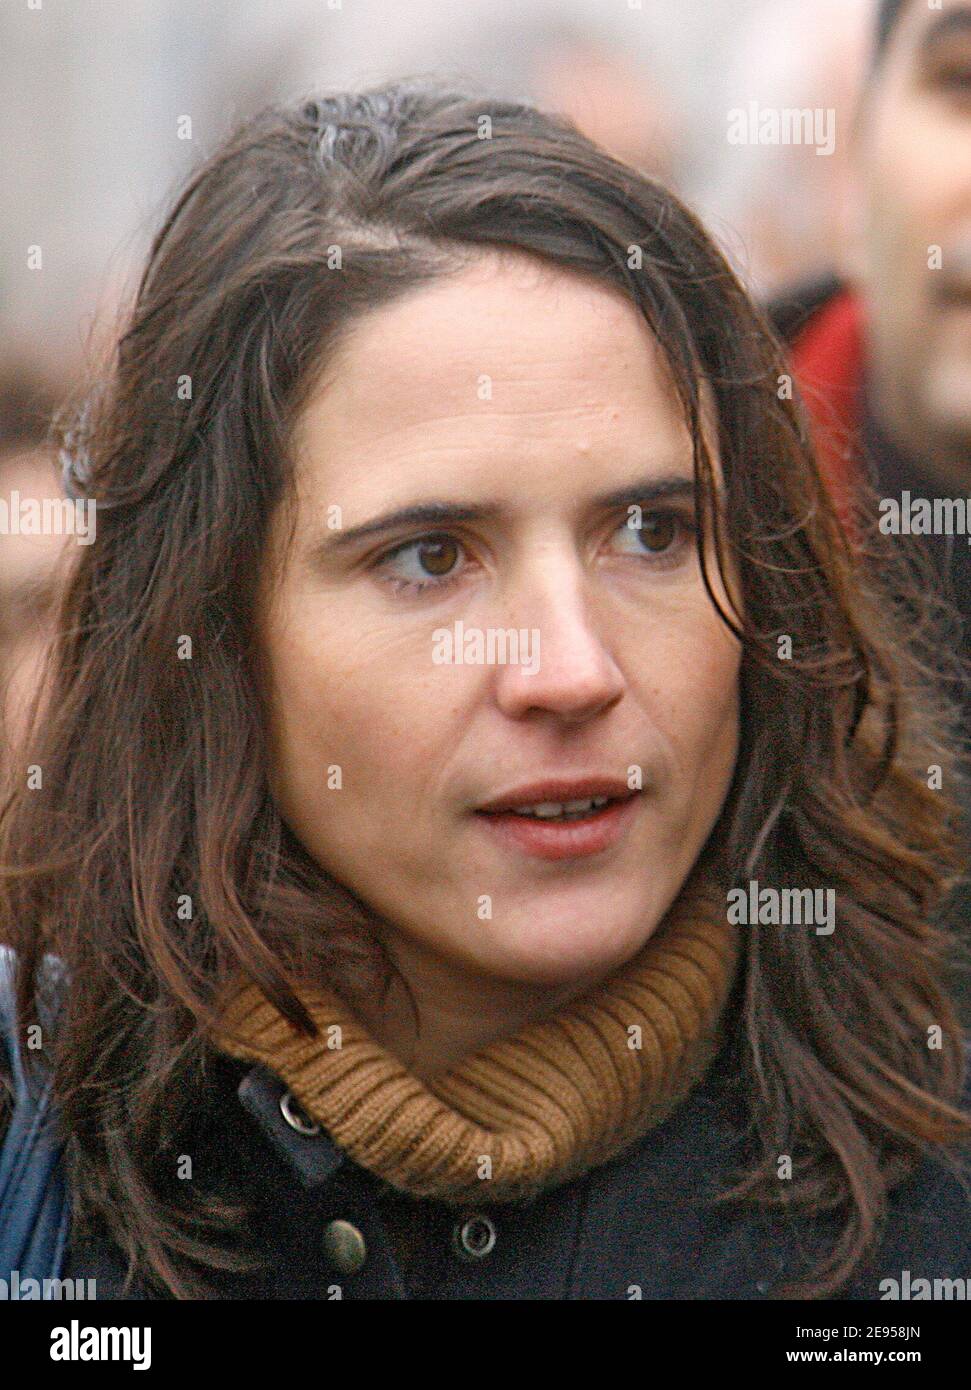 Francois Mitterrand's daughter Mazarine Pingeot-Mitterrand attends the ceremony to honor the memory of former French president Francois Mitterrand on January 8, 2006, for the tenth anniversary of his death. The ceremony is held in Mitterrand's home city of Jarnac where he is buried in his family's grave. Mitterrand's home, now a museum open to the public, is officially inaugurate on this day. Photo by Bernard-Mousse/ABACAPRESS.COM. Stock Photo